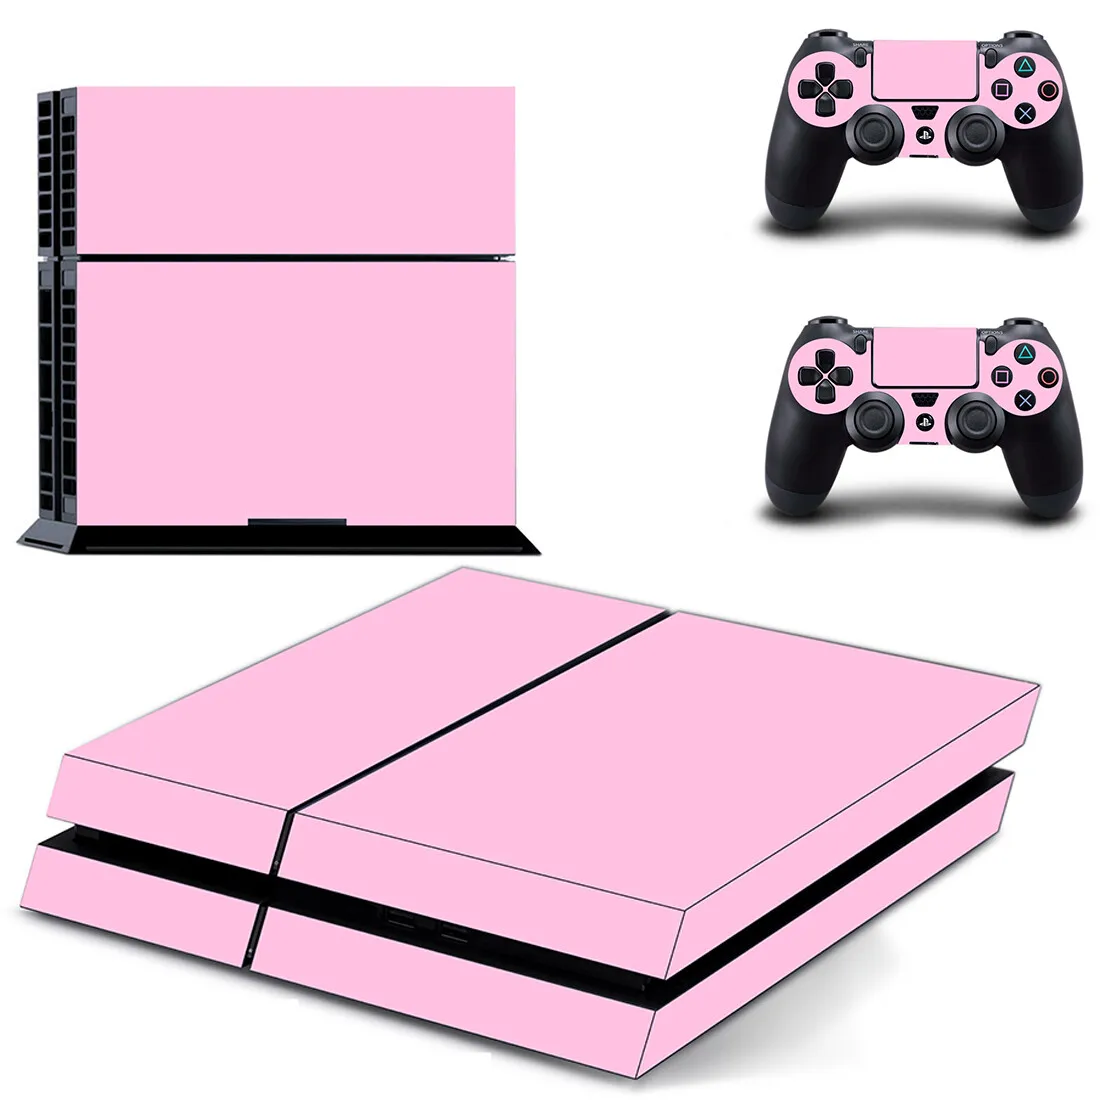 Pure Pink Color PS4 Stickers Play station 4 Skin Sticker Decal Cover For PlayStation 4 PS4 Console & Controller Skins Vinyl